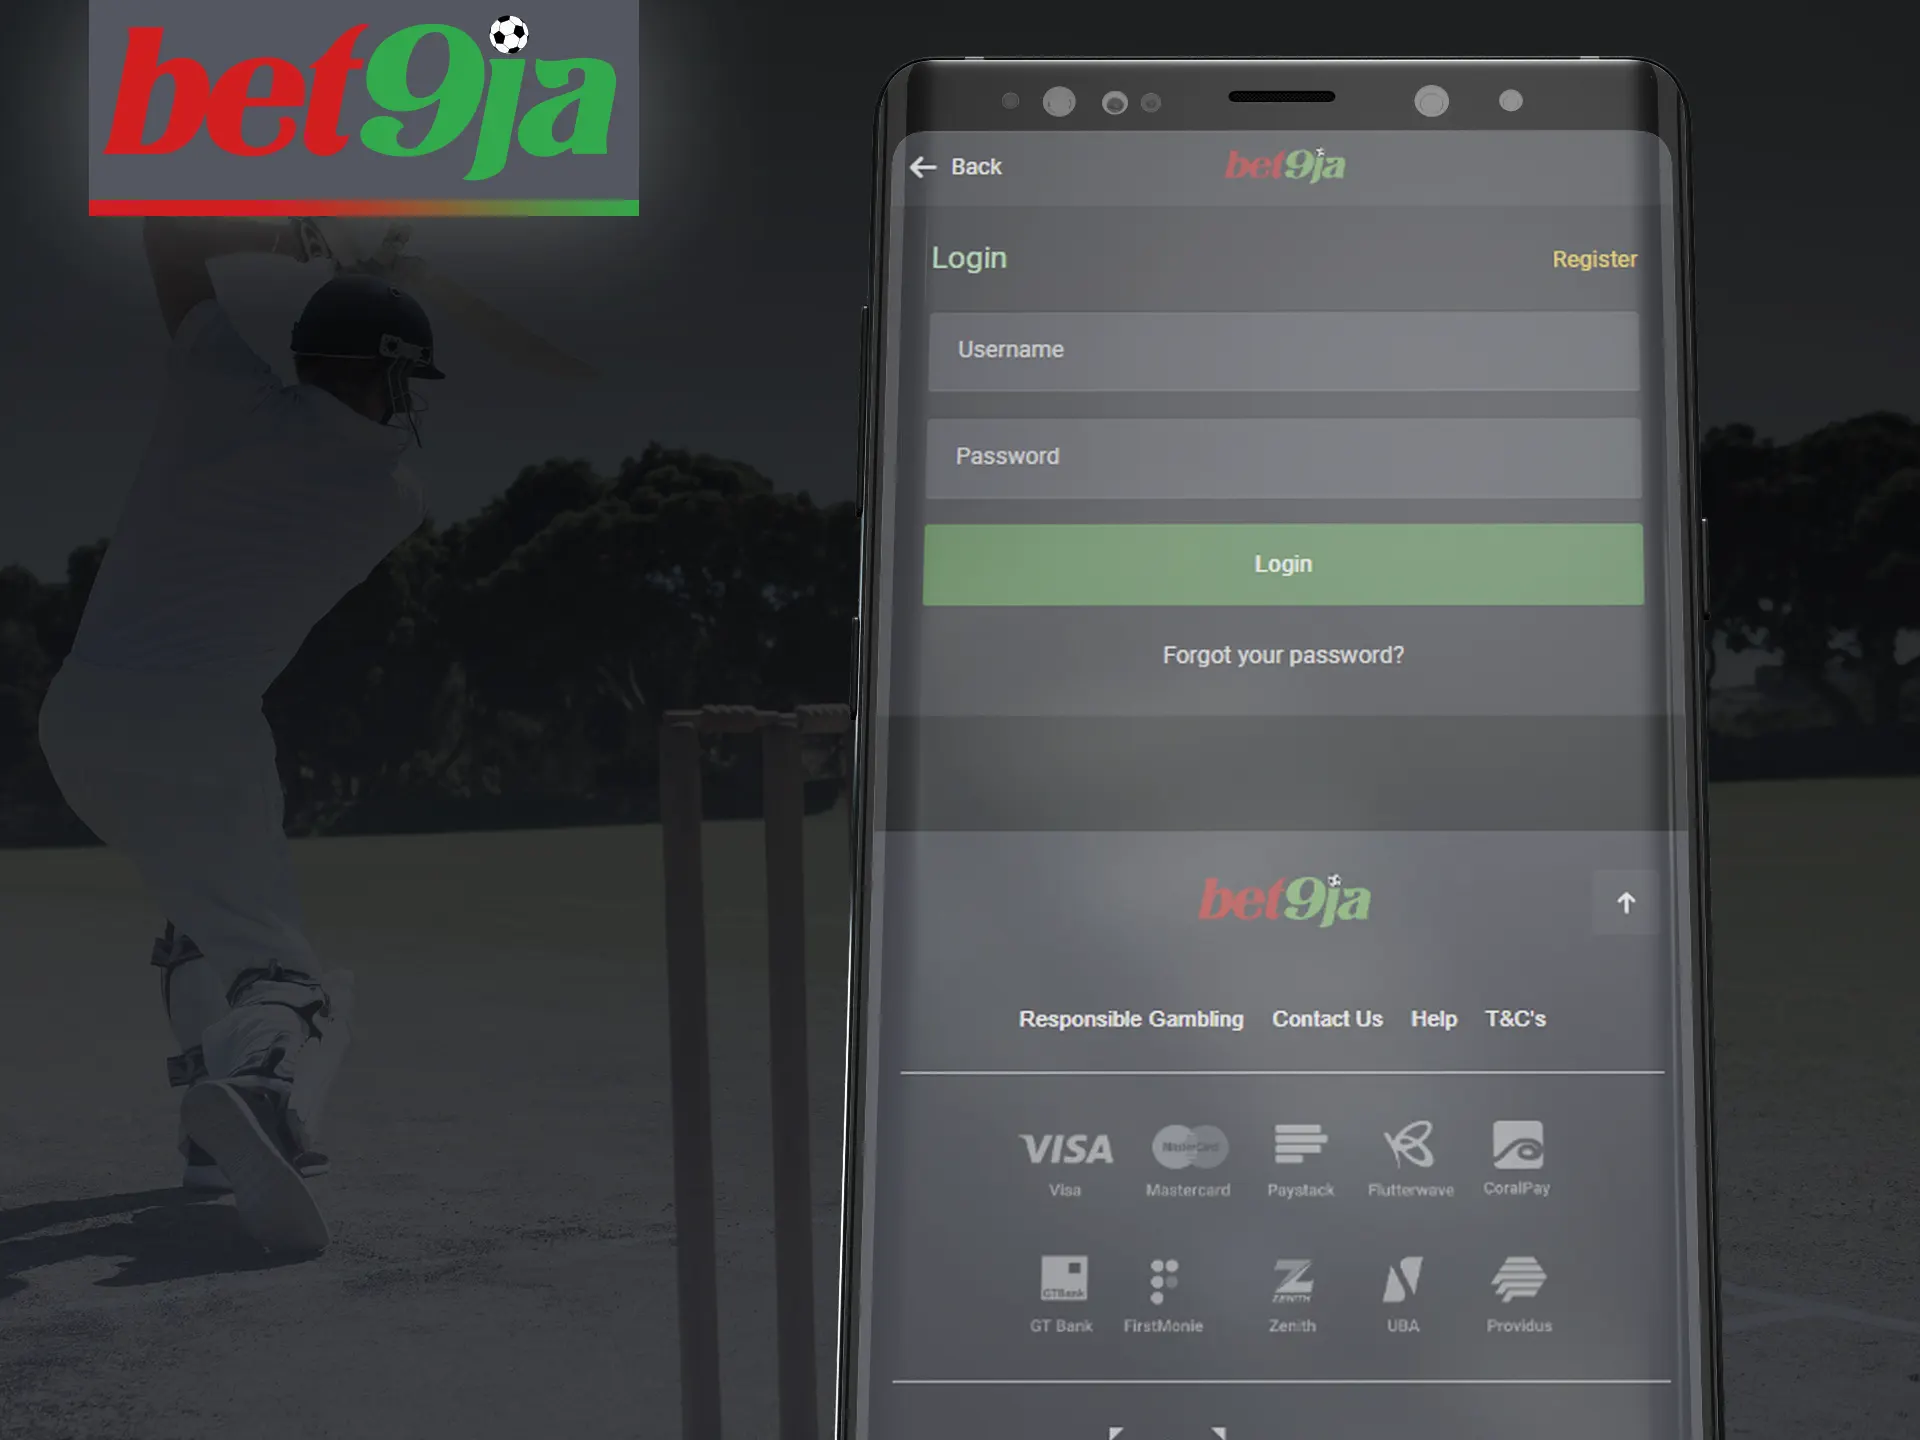 Log in to your account on the Bet9ja app.